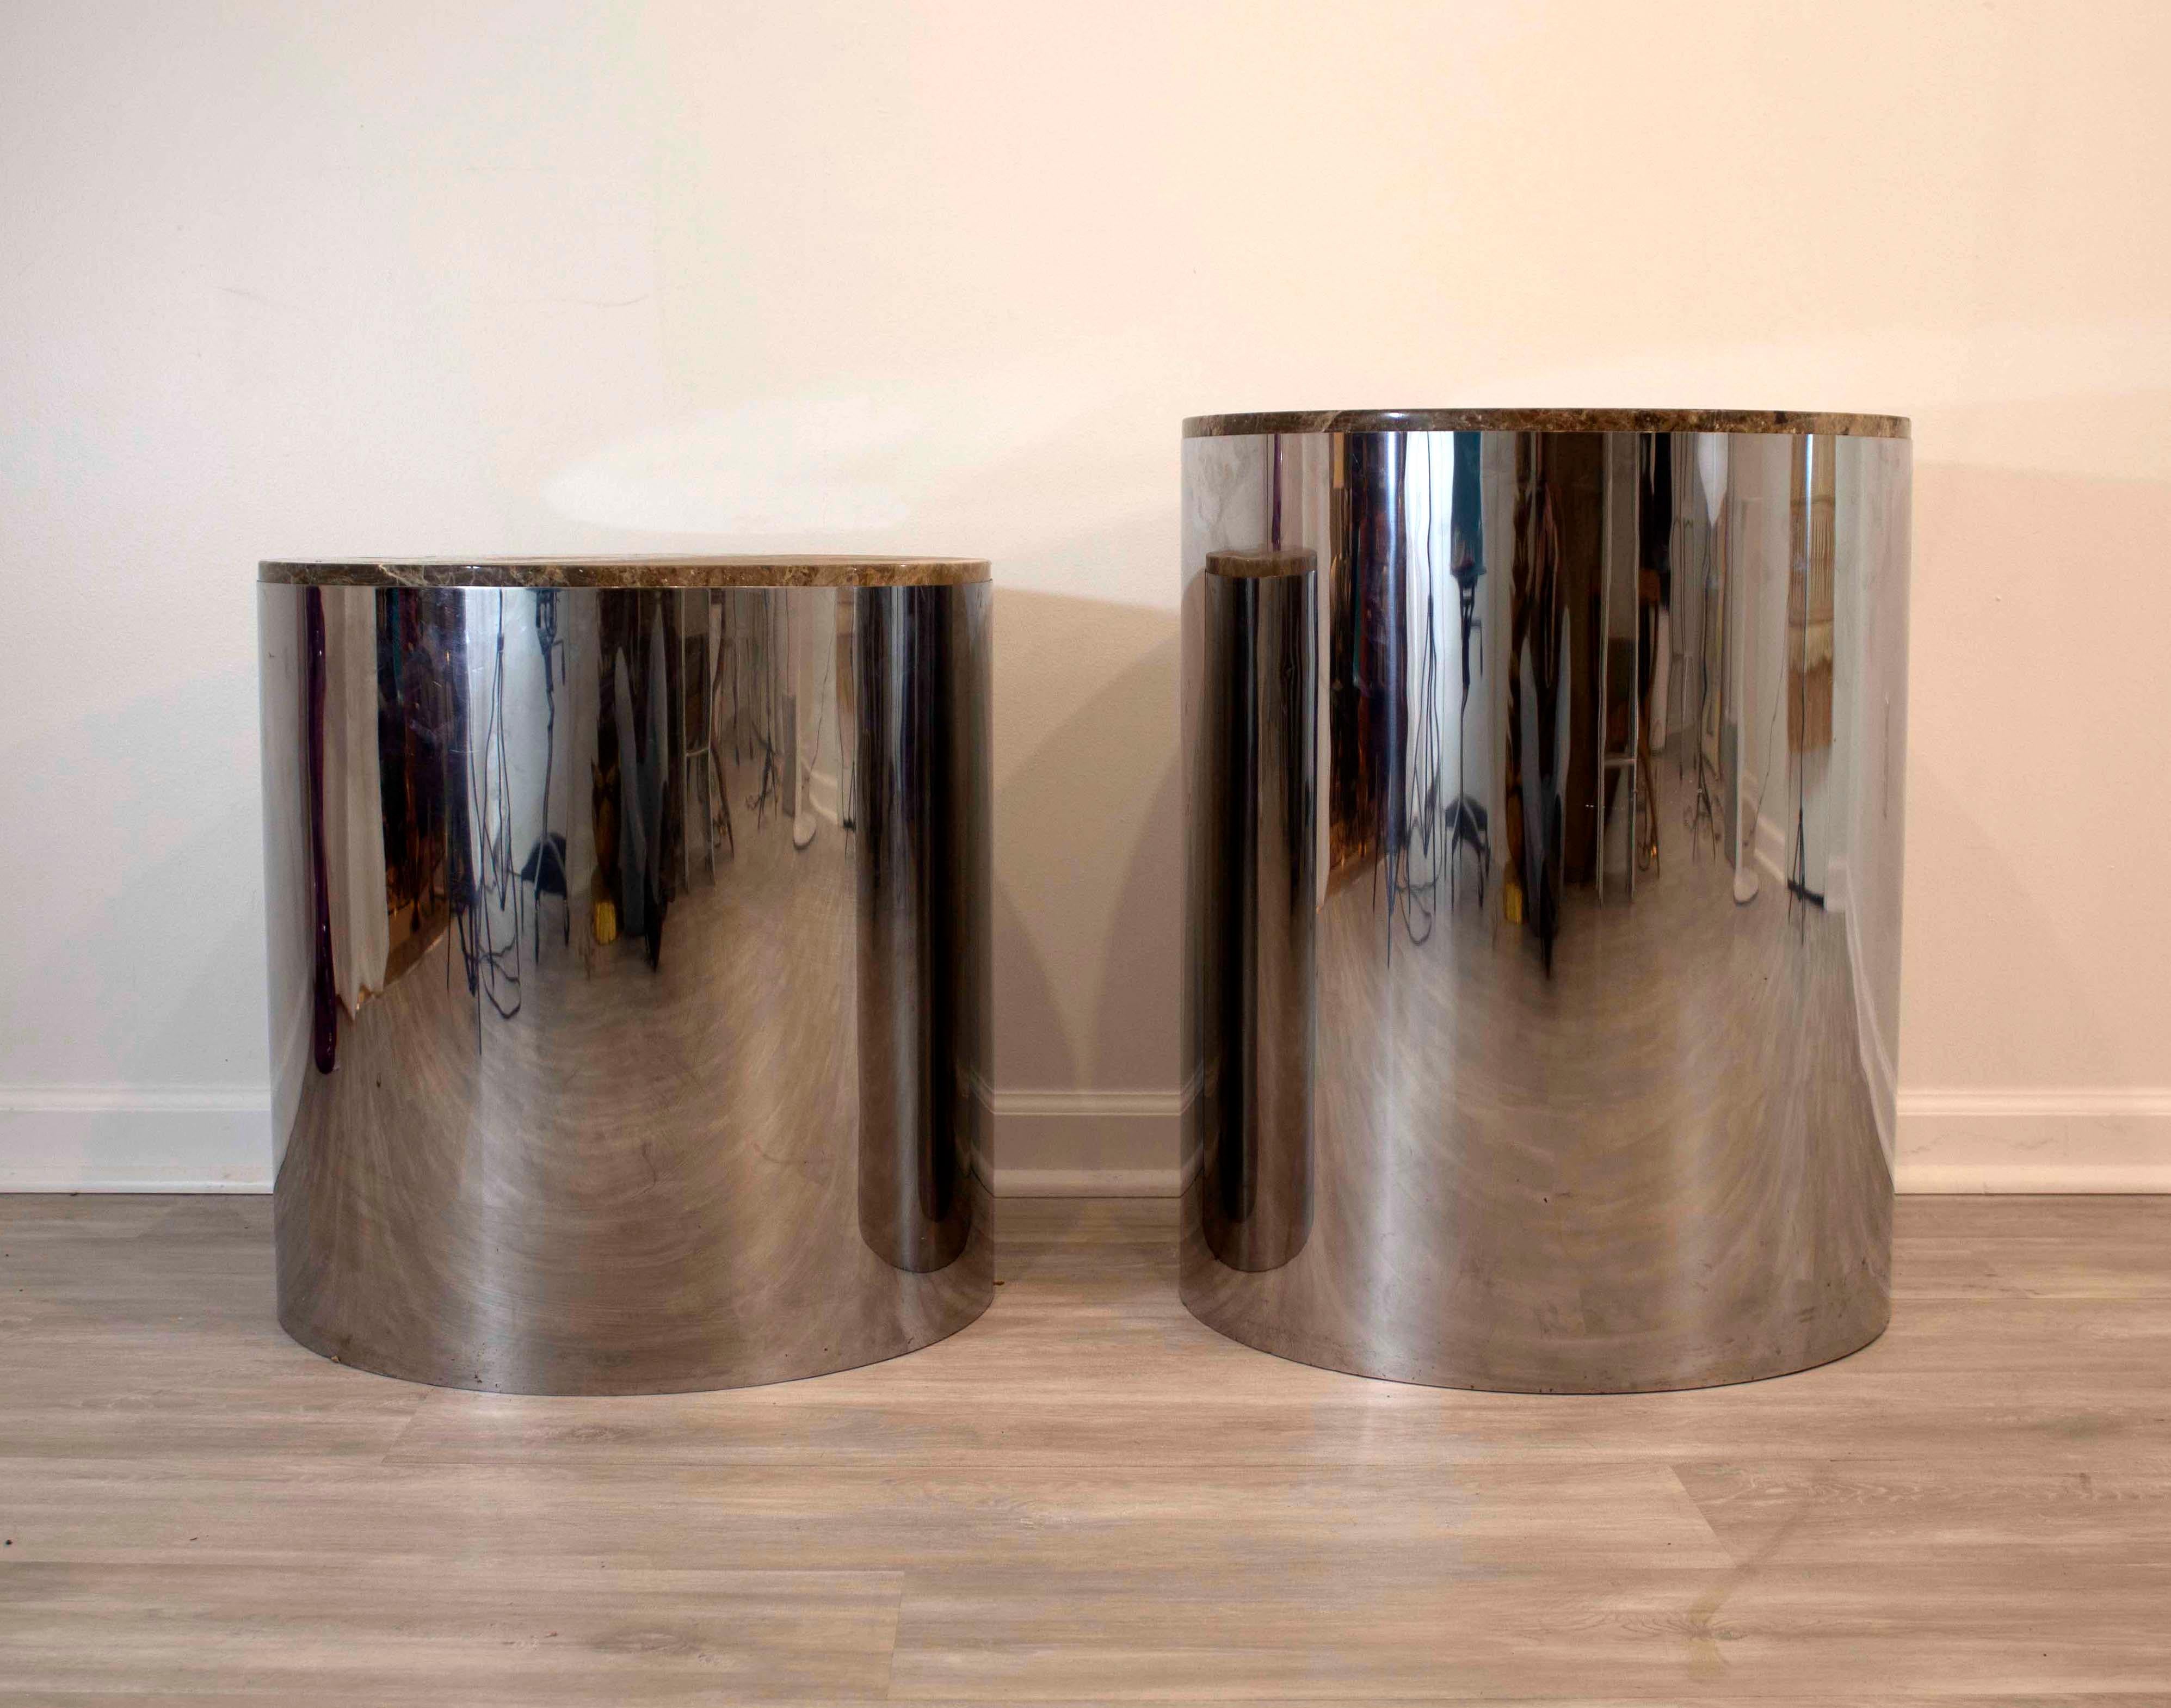 These Baughman style drum side and end tables, designed with a round, chrome base and rich marble top are in very good condition. This pair of differing heights could be used as side tables as well as pedestals for holding art or sculpture.

In